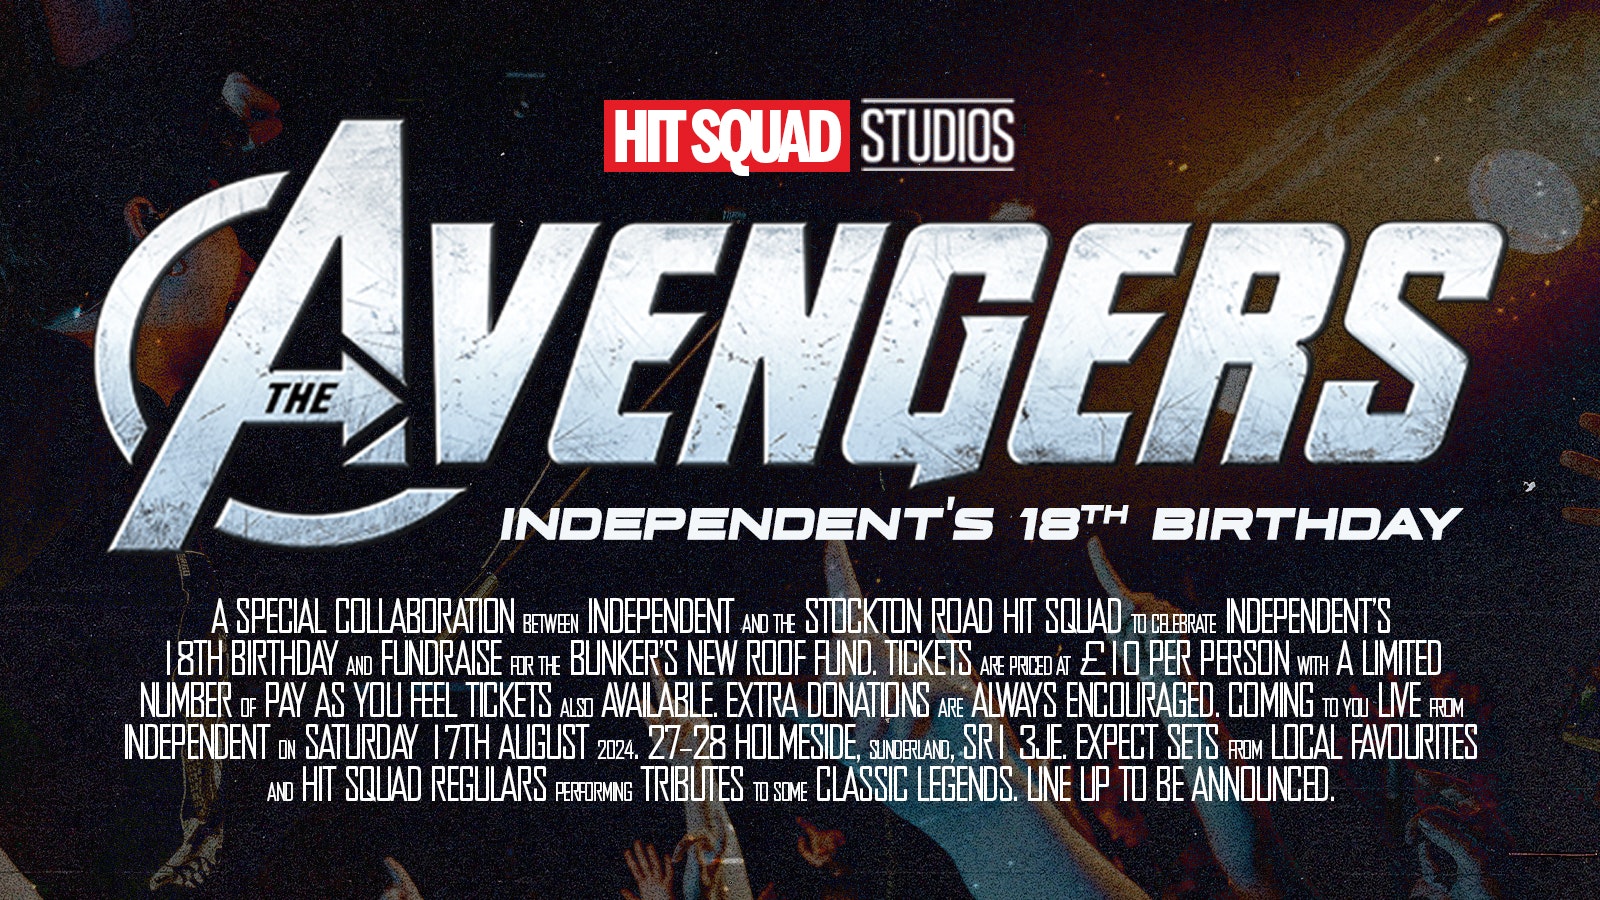 SRHS: Independent’s 18th Birthday ‘The Avengers’